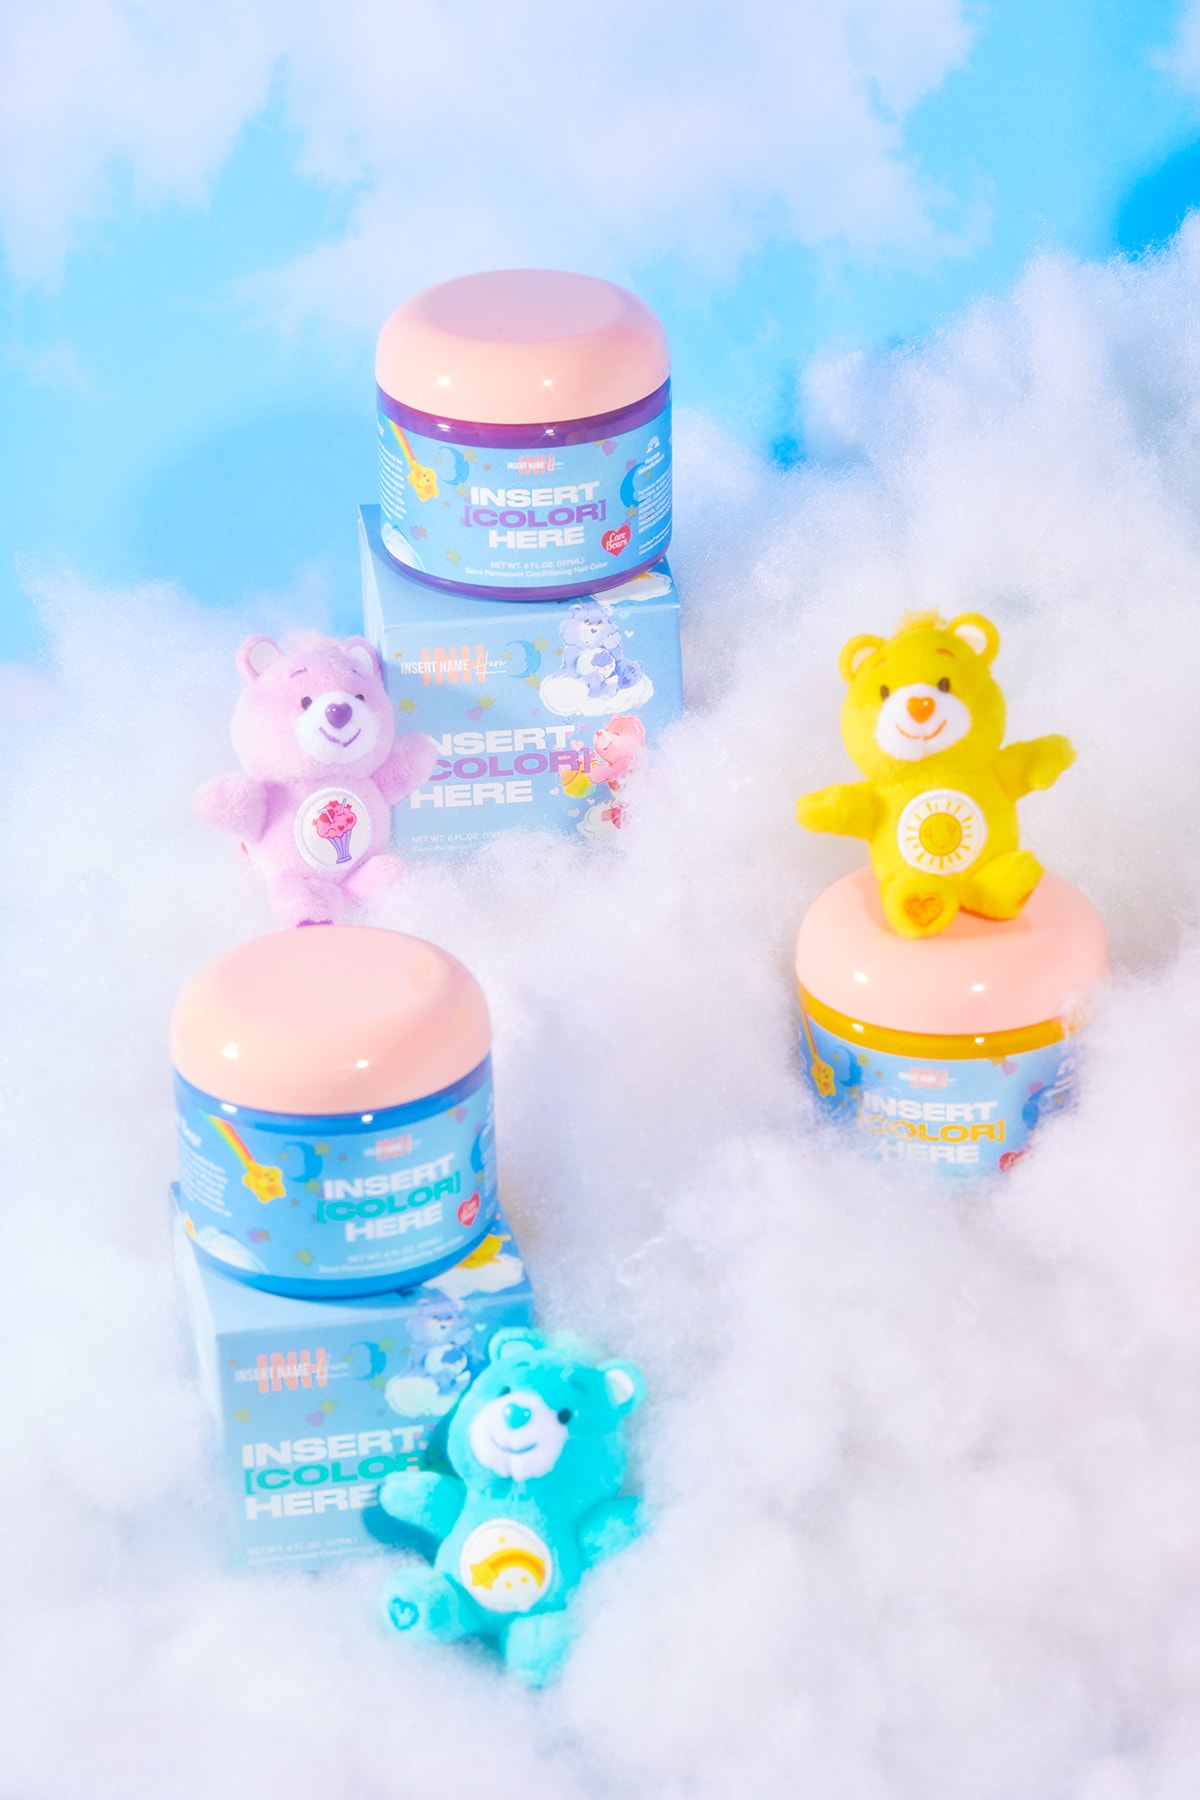 Care Bears x Insert Name Here INH Hair Dye Collaboration Color Collection